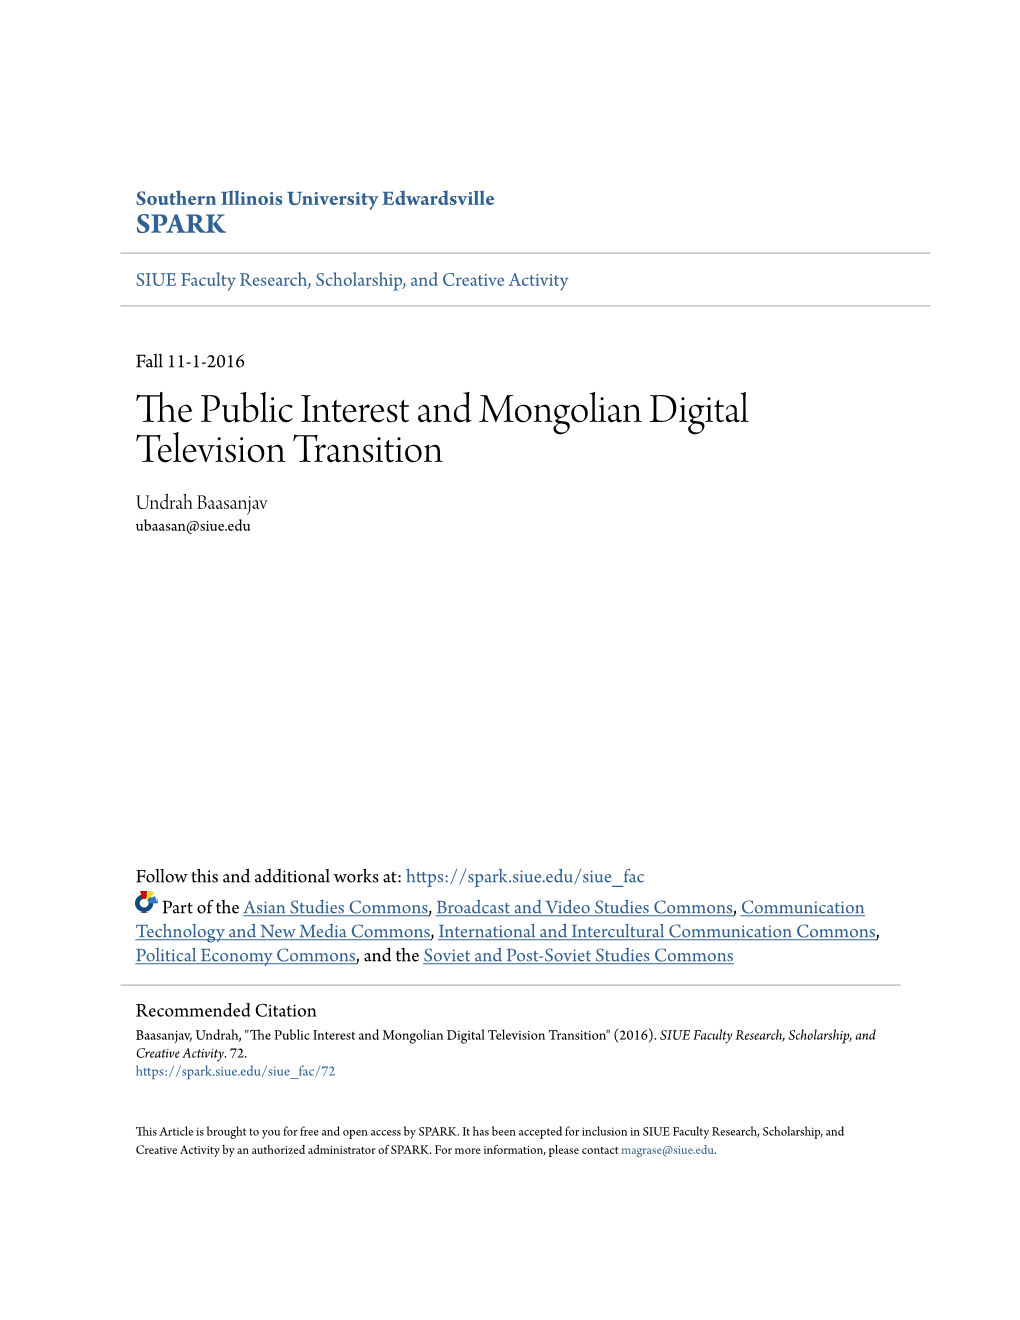 The Public Interest and Mongolian Digital Television Transition